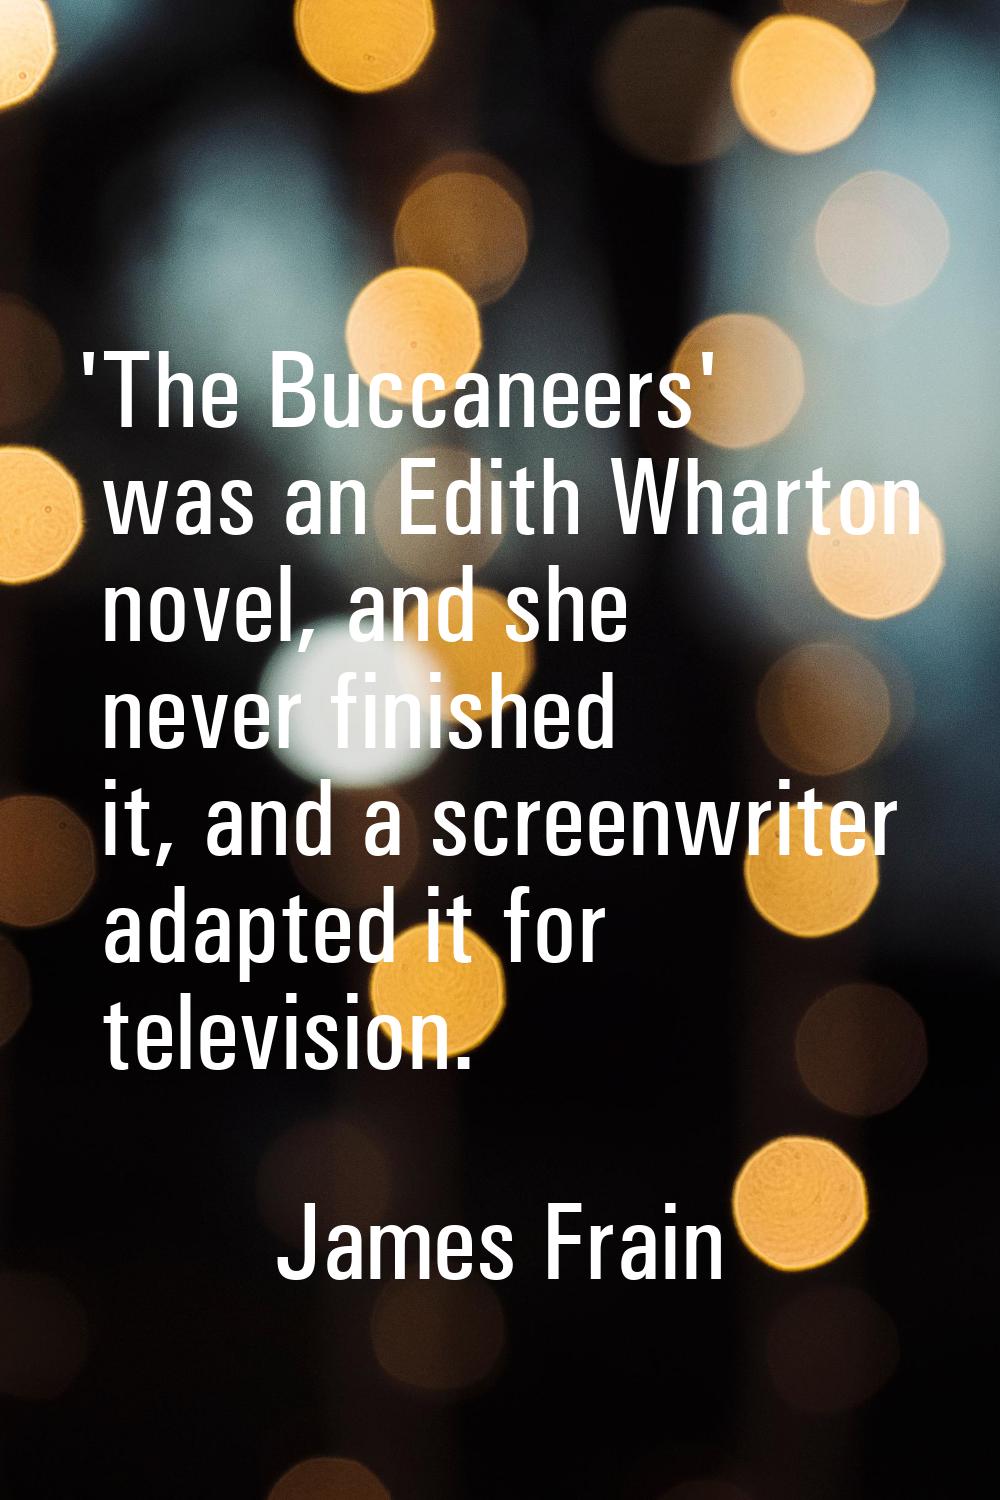 'The Buccaneers' was an Edith Wharton novel, and she never finished it, and a screenwriter adapted 